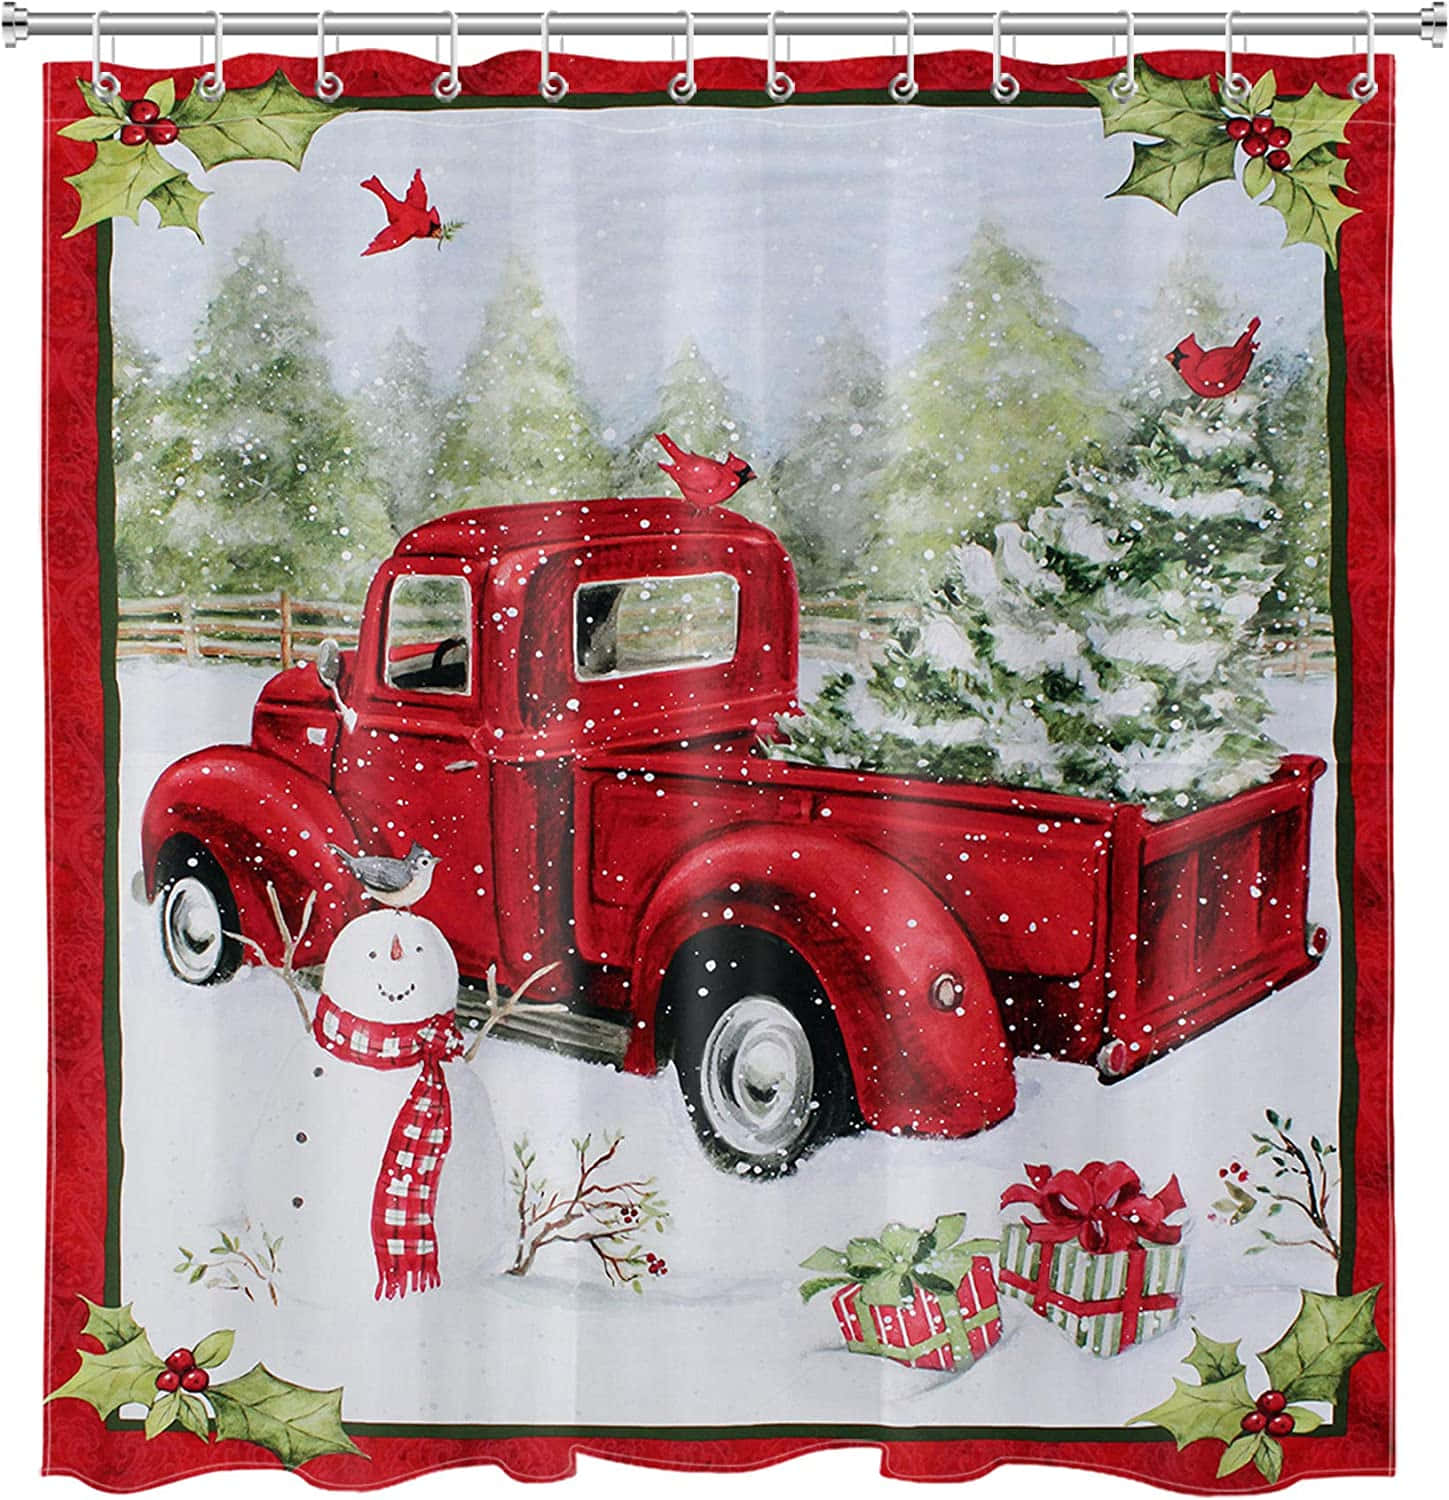 A vintage truck decorated with festive lights for the holiday season. Wallpaper